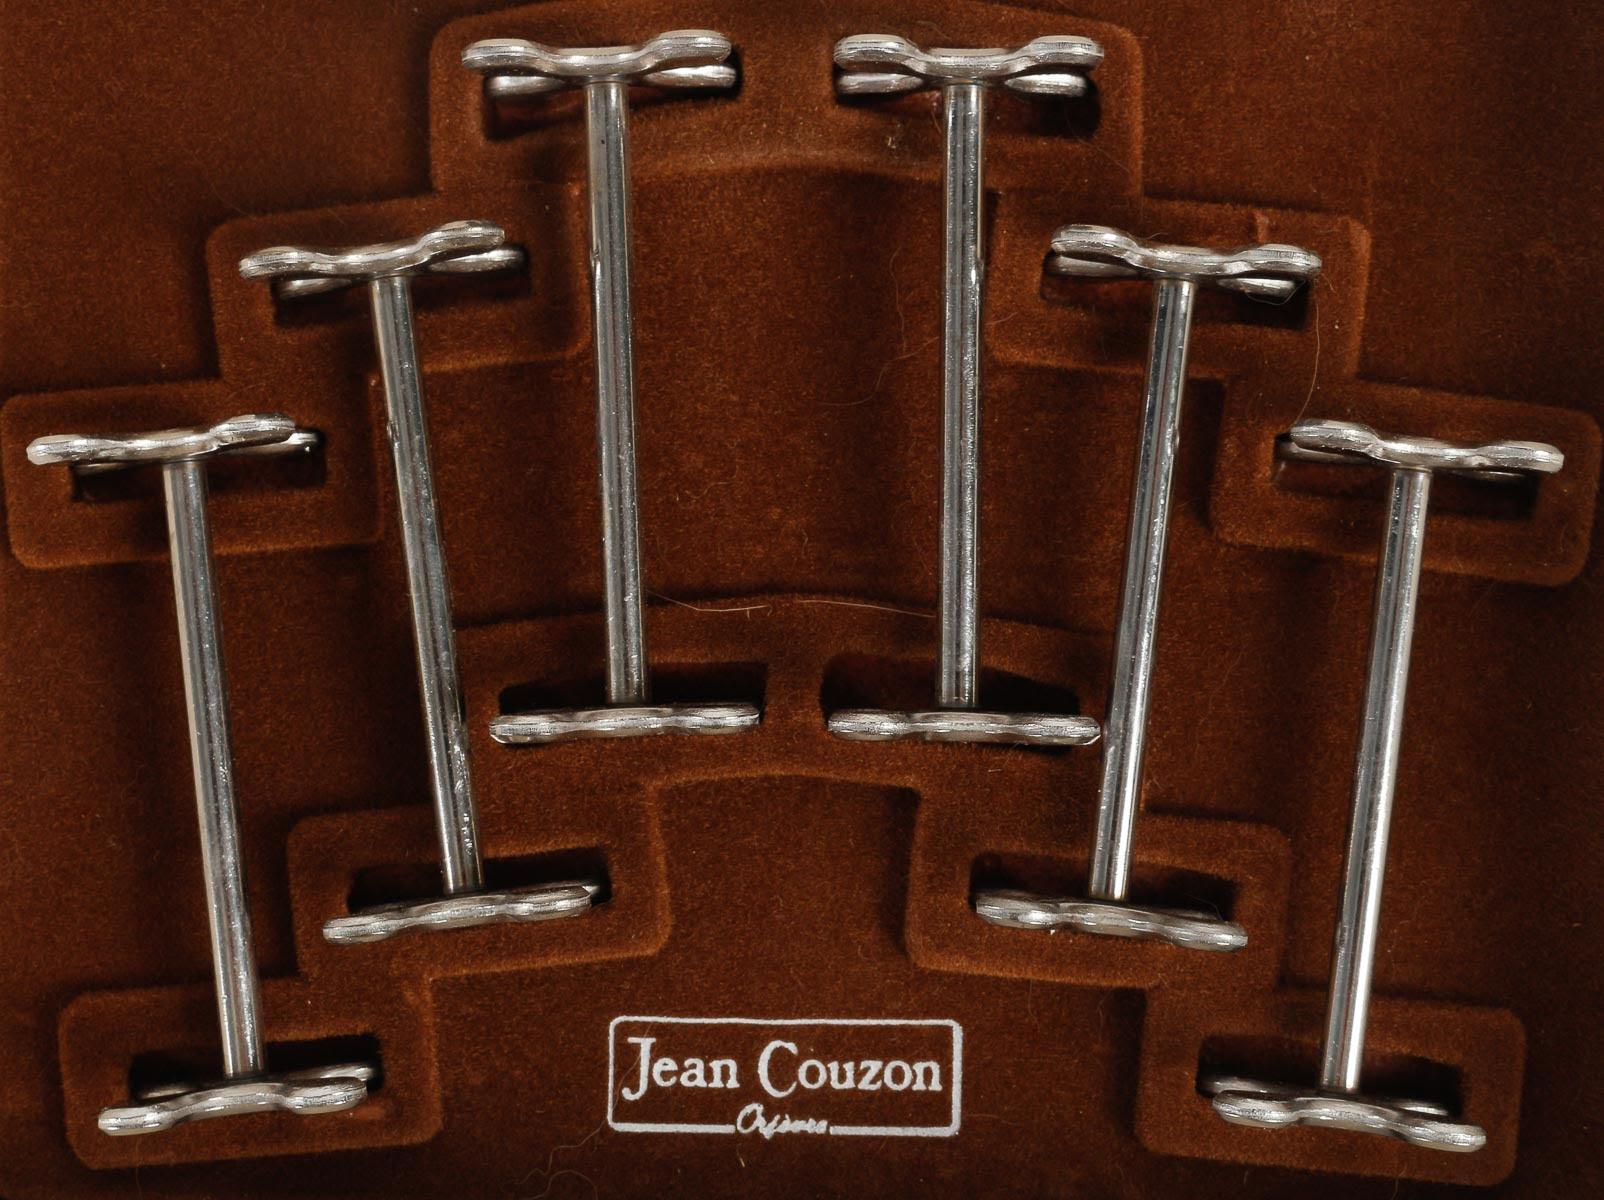 Set of 6 knife rests by La Maison Jean Goujon, XXth Century.

Set of 6 silver plated knife rests from the Maison Jean Goujon, Goldsmith, Maltese Cross model, in original box, 1980, new condition.  

H: 3,5cm, W: 15,5cm, D: 19,5cm